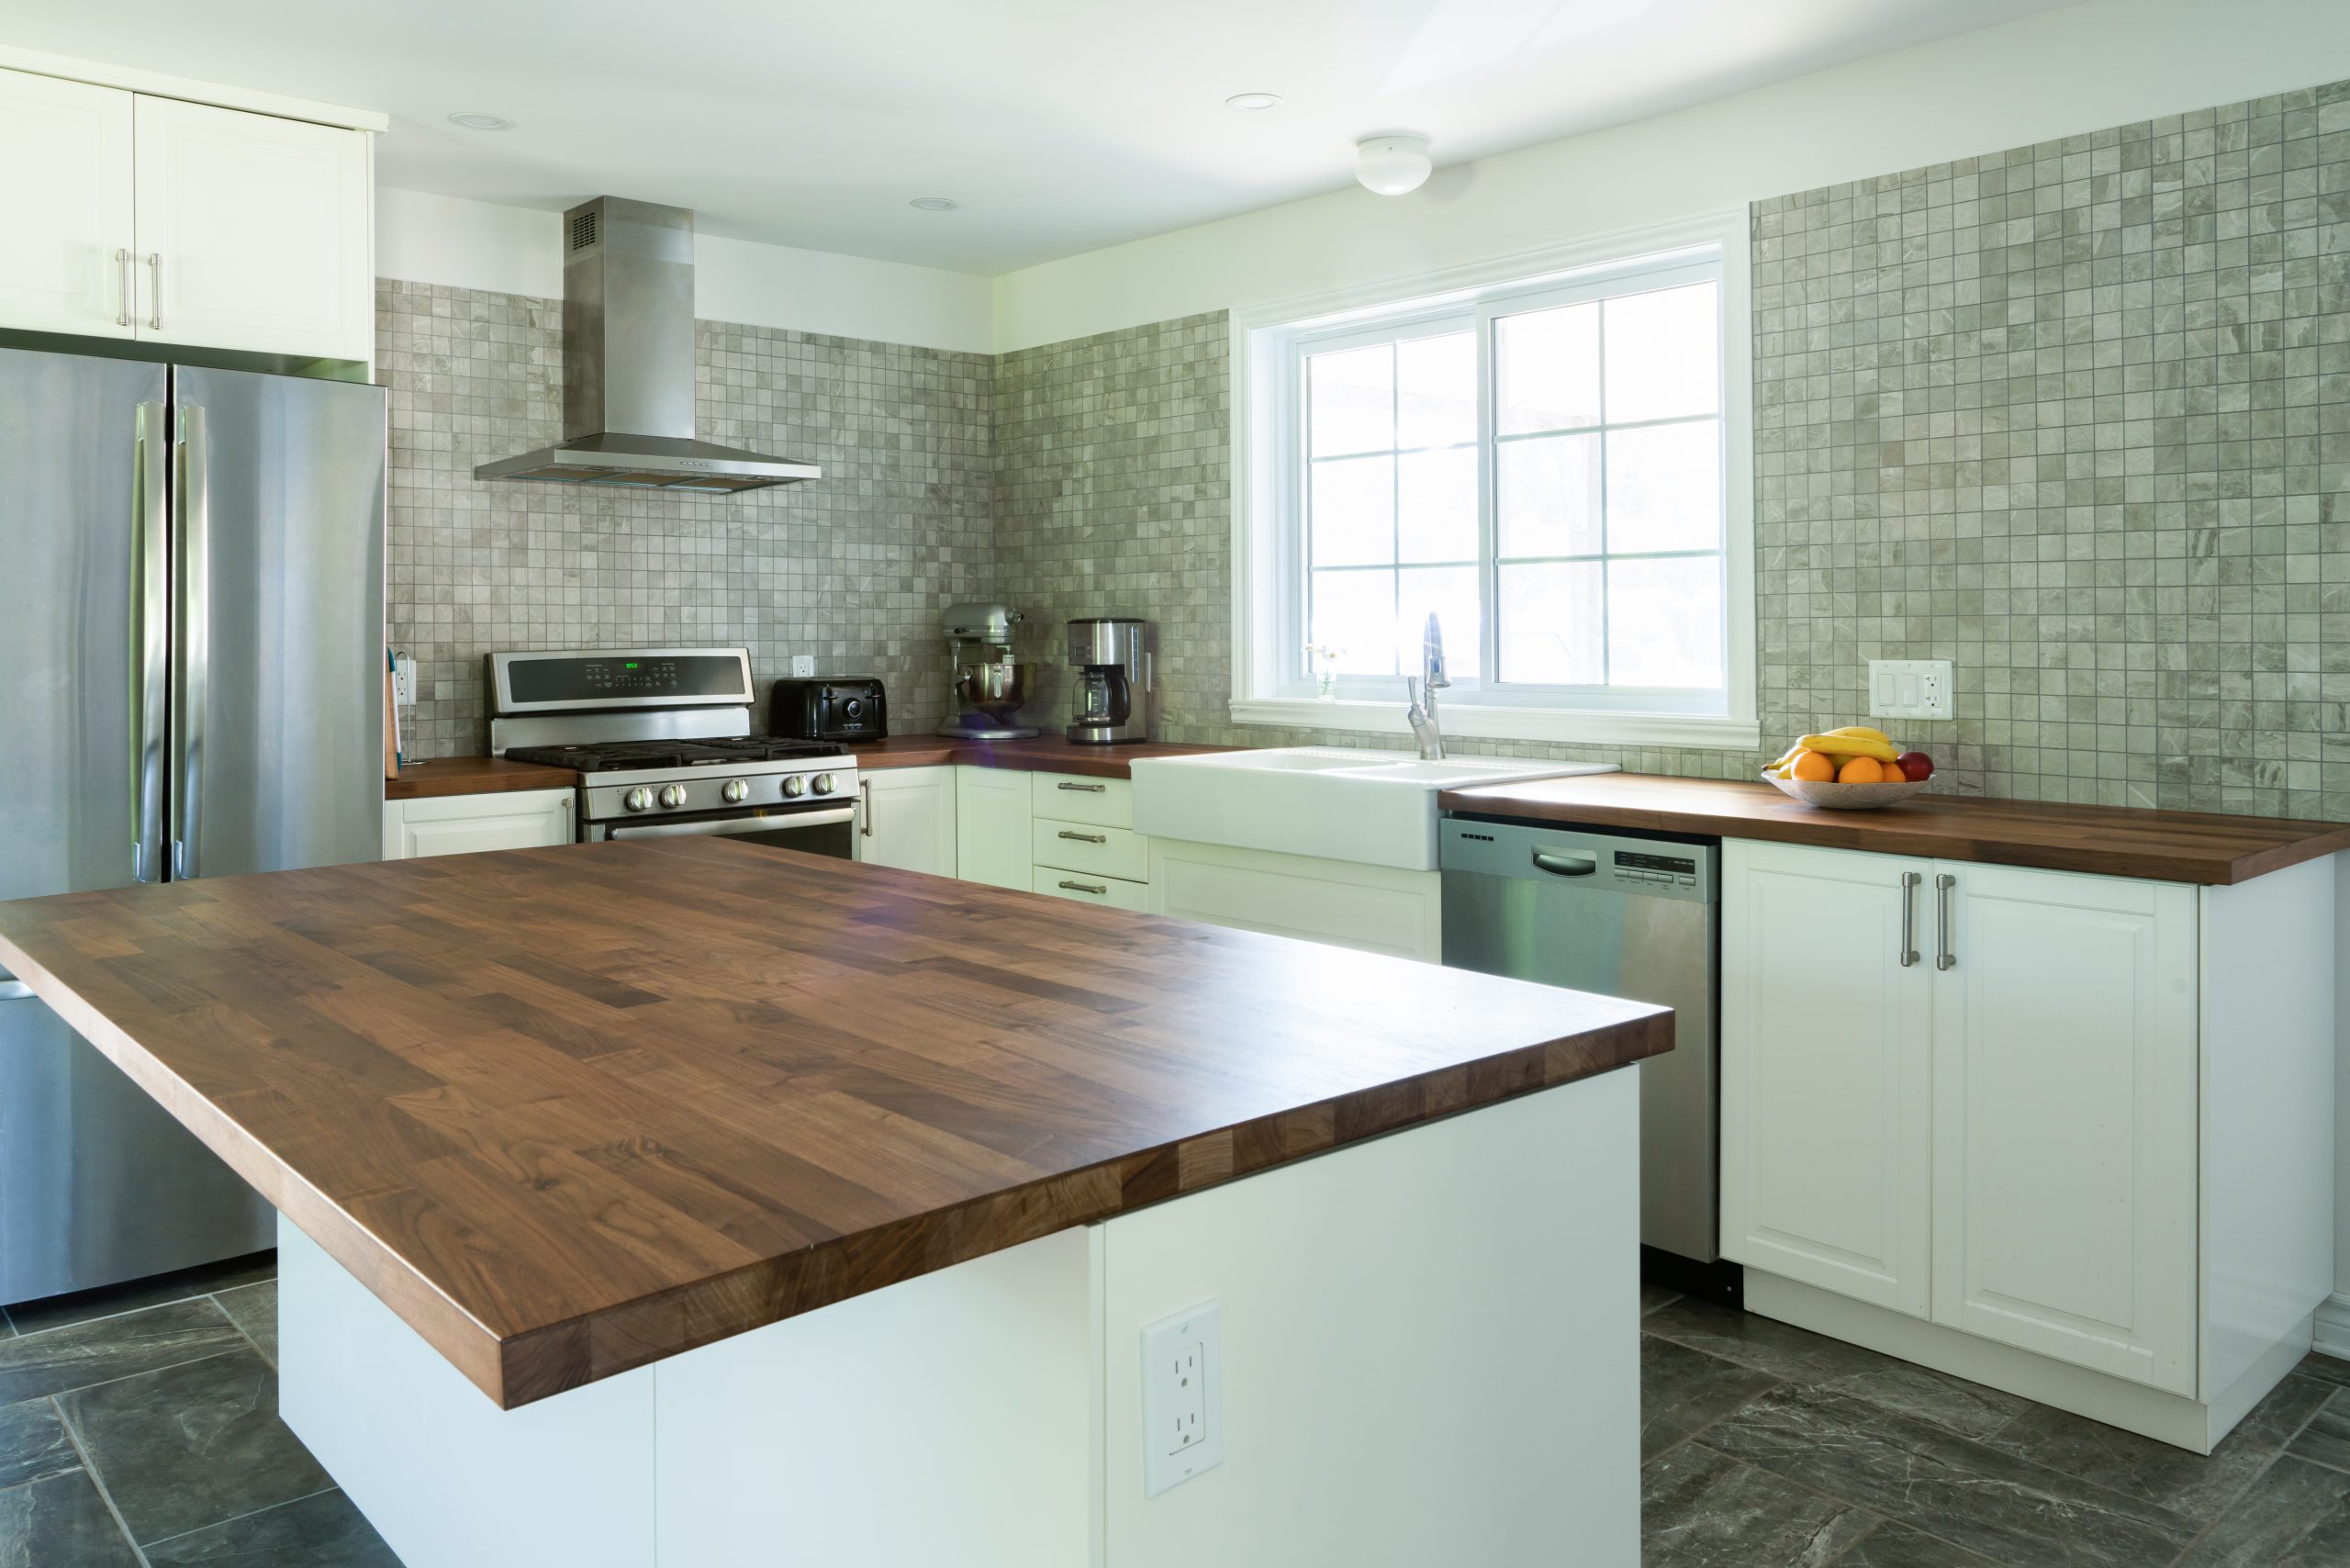 10 tips to renovate your kitchen before you sell